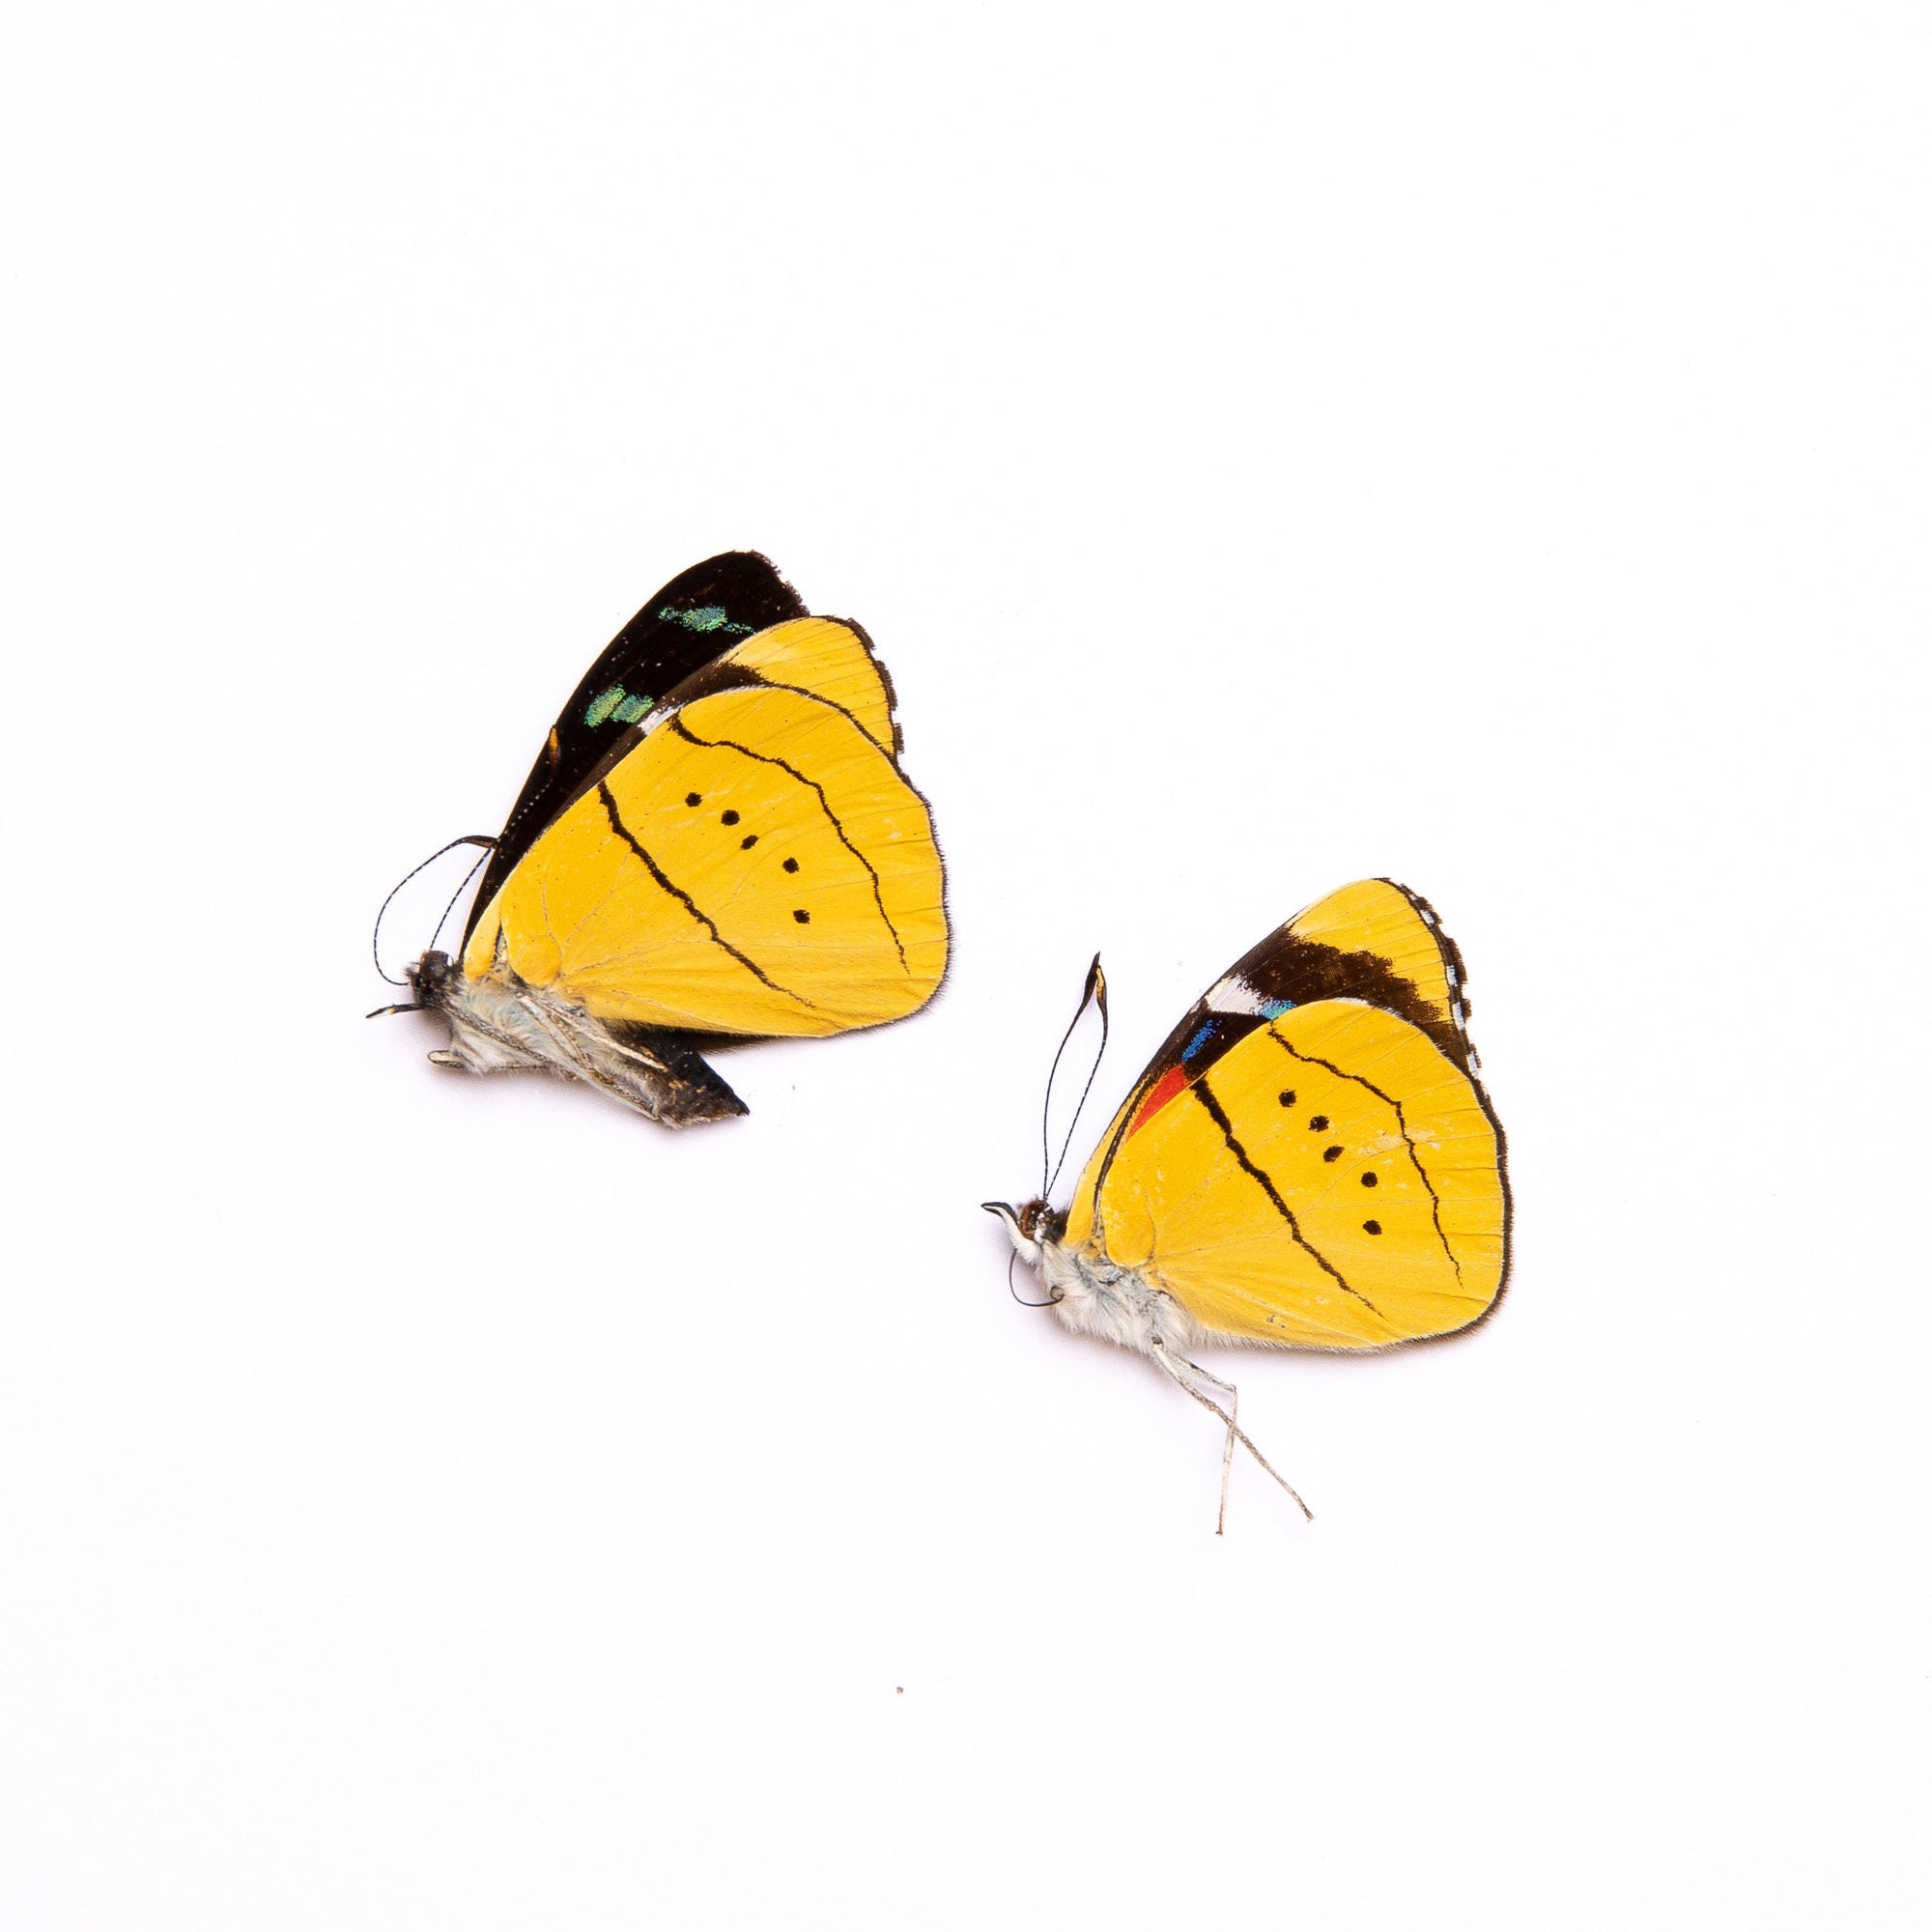 TWO (2) Perisama humboldtii | A1 Real Dry-Preserved Butterflies | Unmounted Entomology Taxidermy Specimens